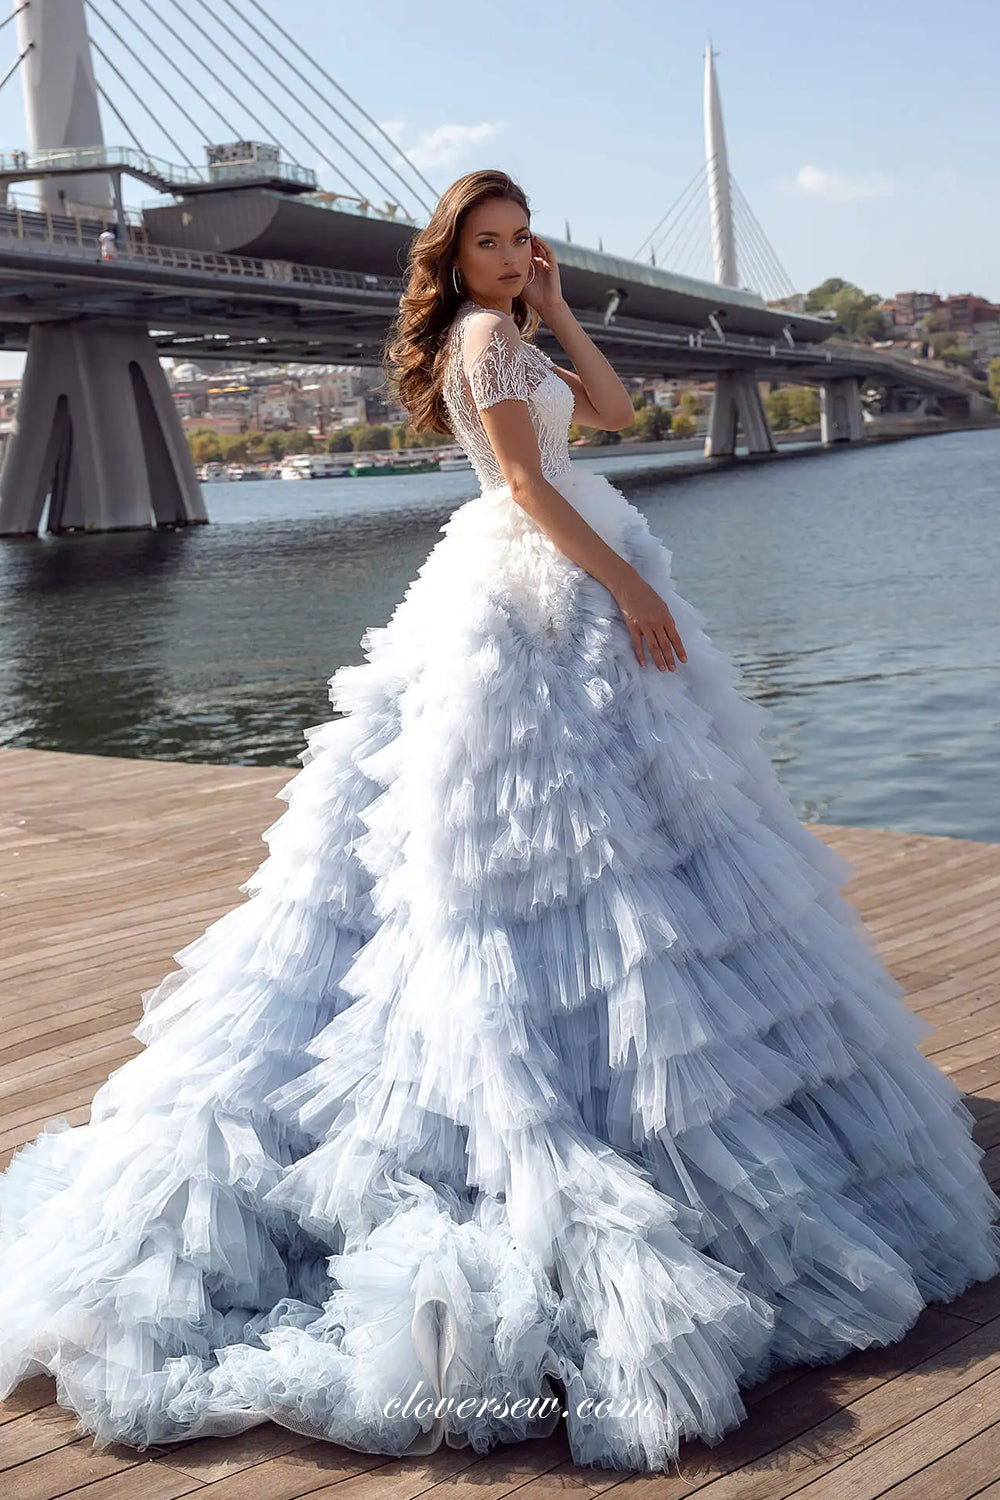 White Light Dusty Blue Ruffles Tulle Beading Lace Tiered Ball Gown Princess Wedding Gowns, CW0376